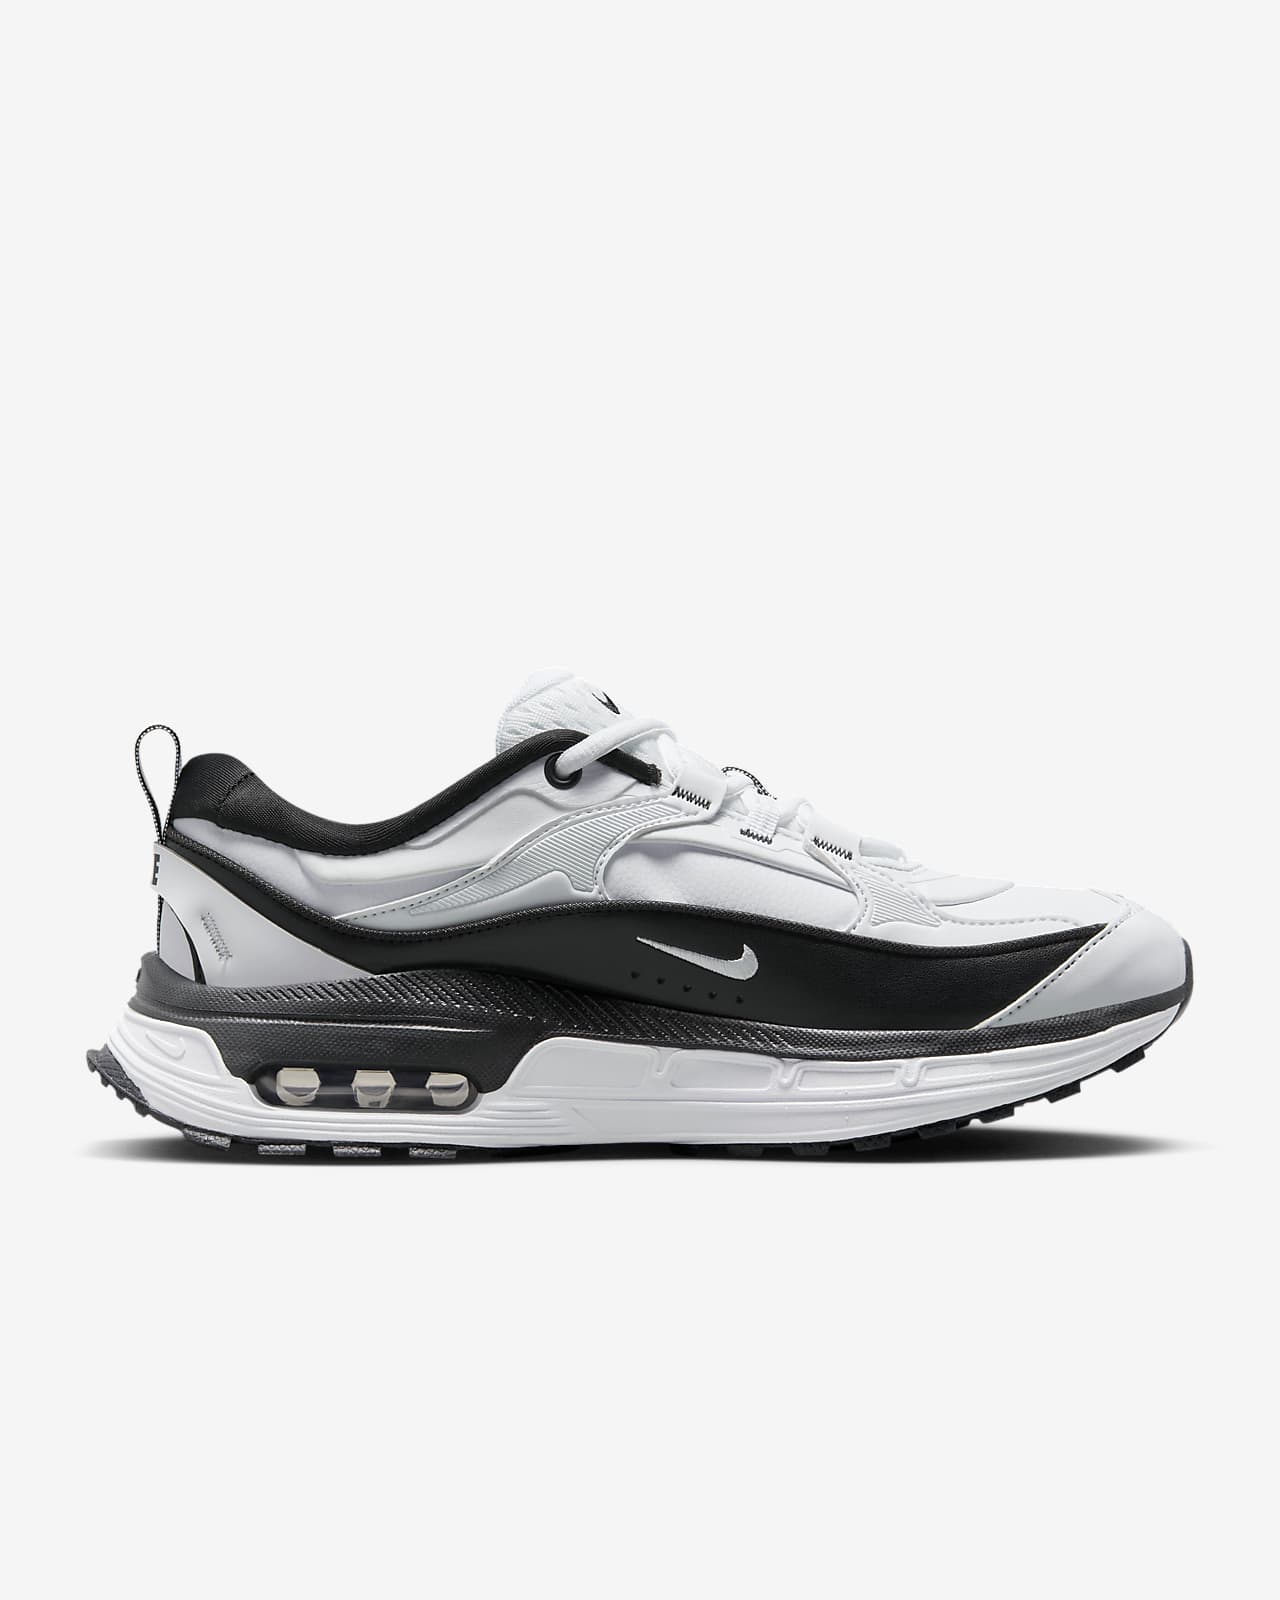 Nike Air Max Bliss LX Women's Shoes